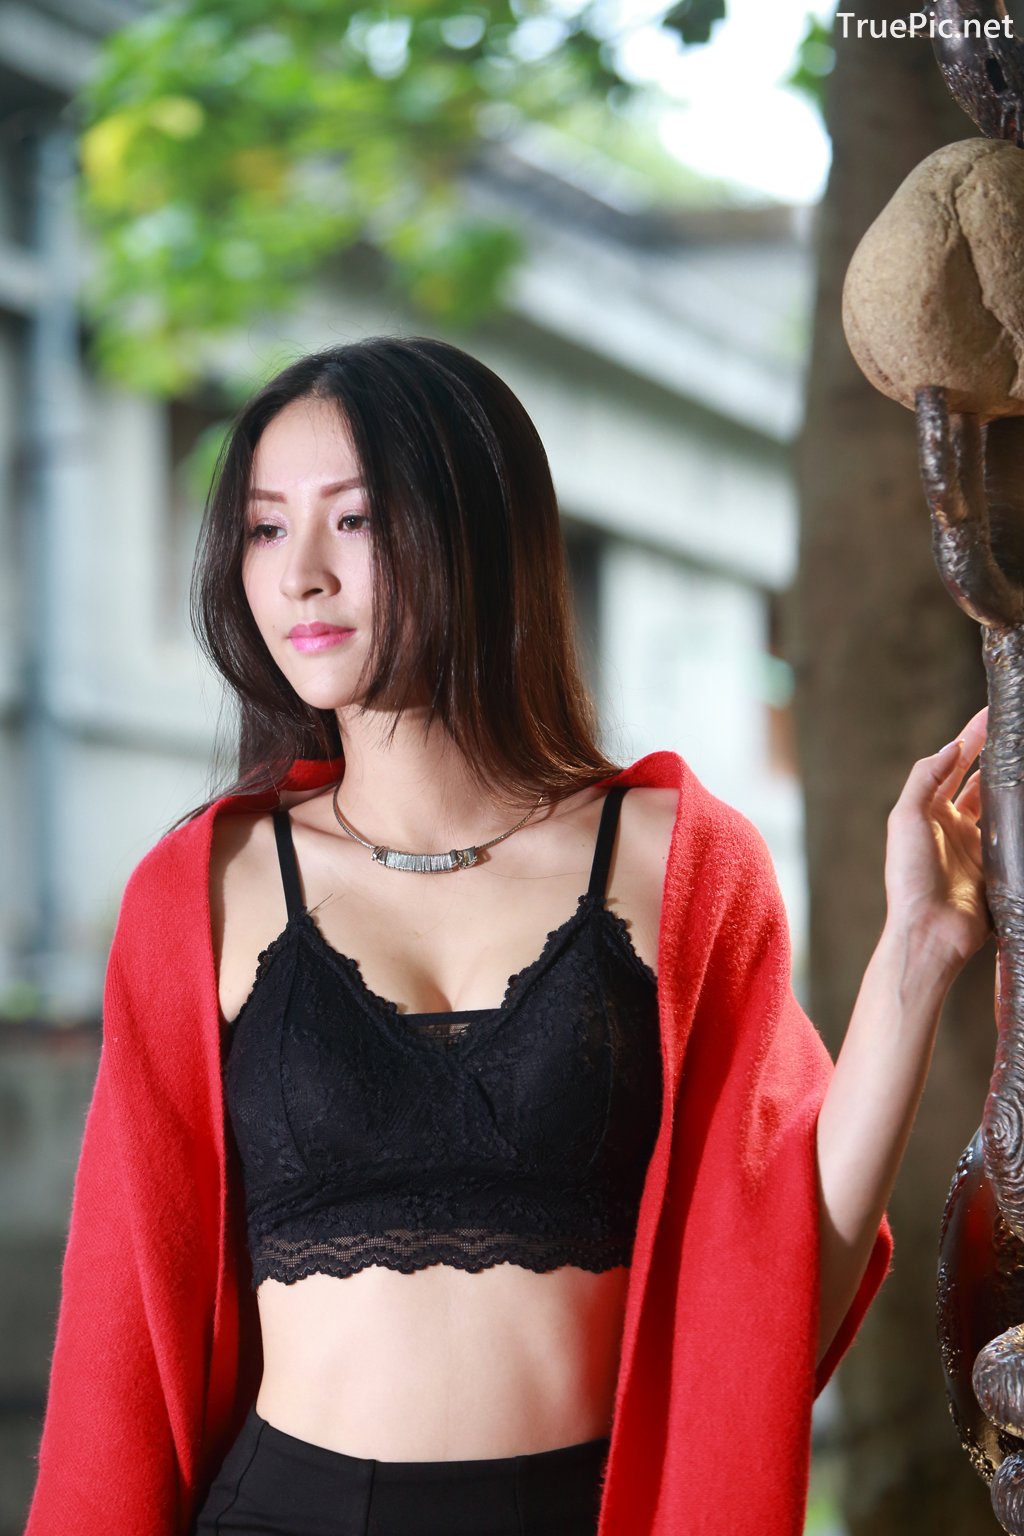 Image-Taiwanese-Beautiful-Long-Legs-Girl-雪岑Lola-Black-Sexy-Short-Pants-and-Crop-Top-Outfit-TruePic.net- Picture-48